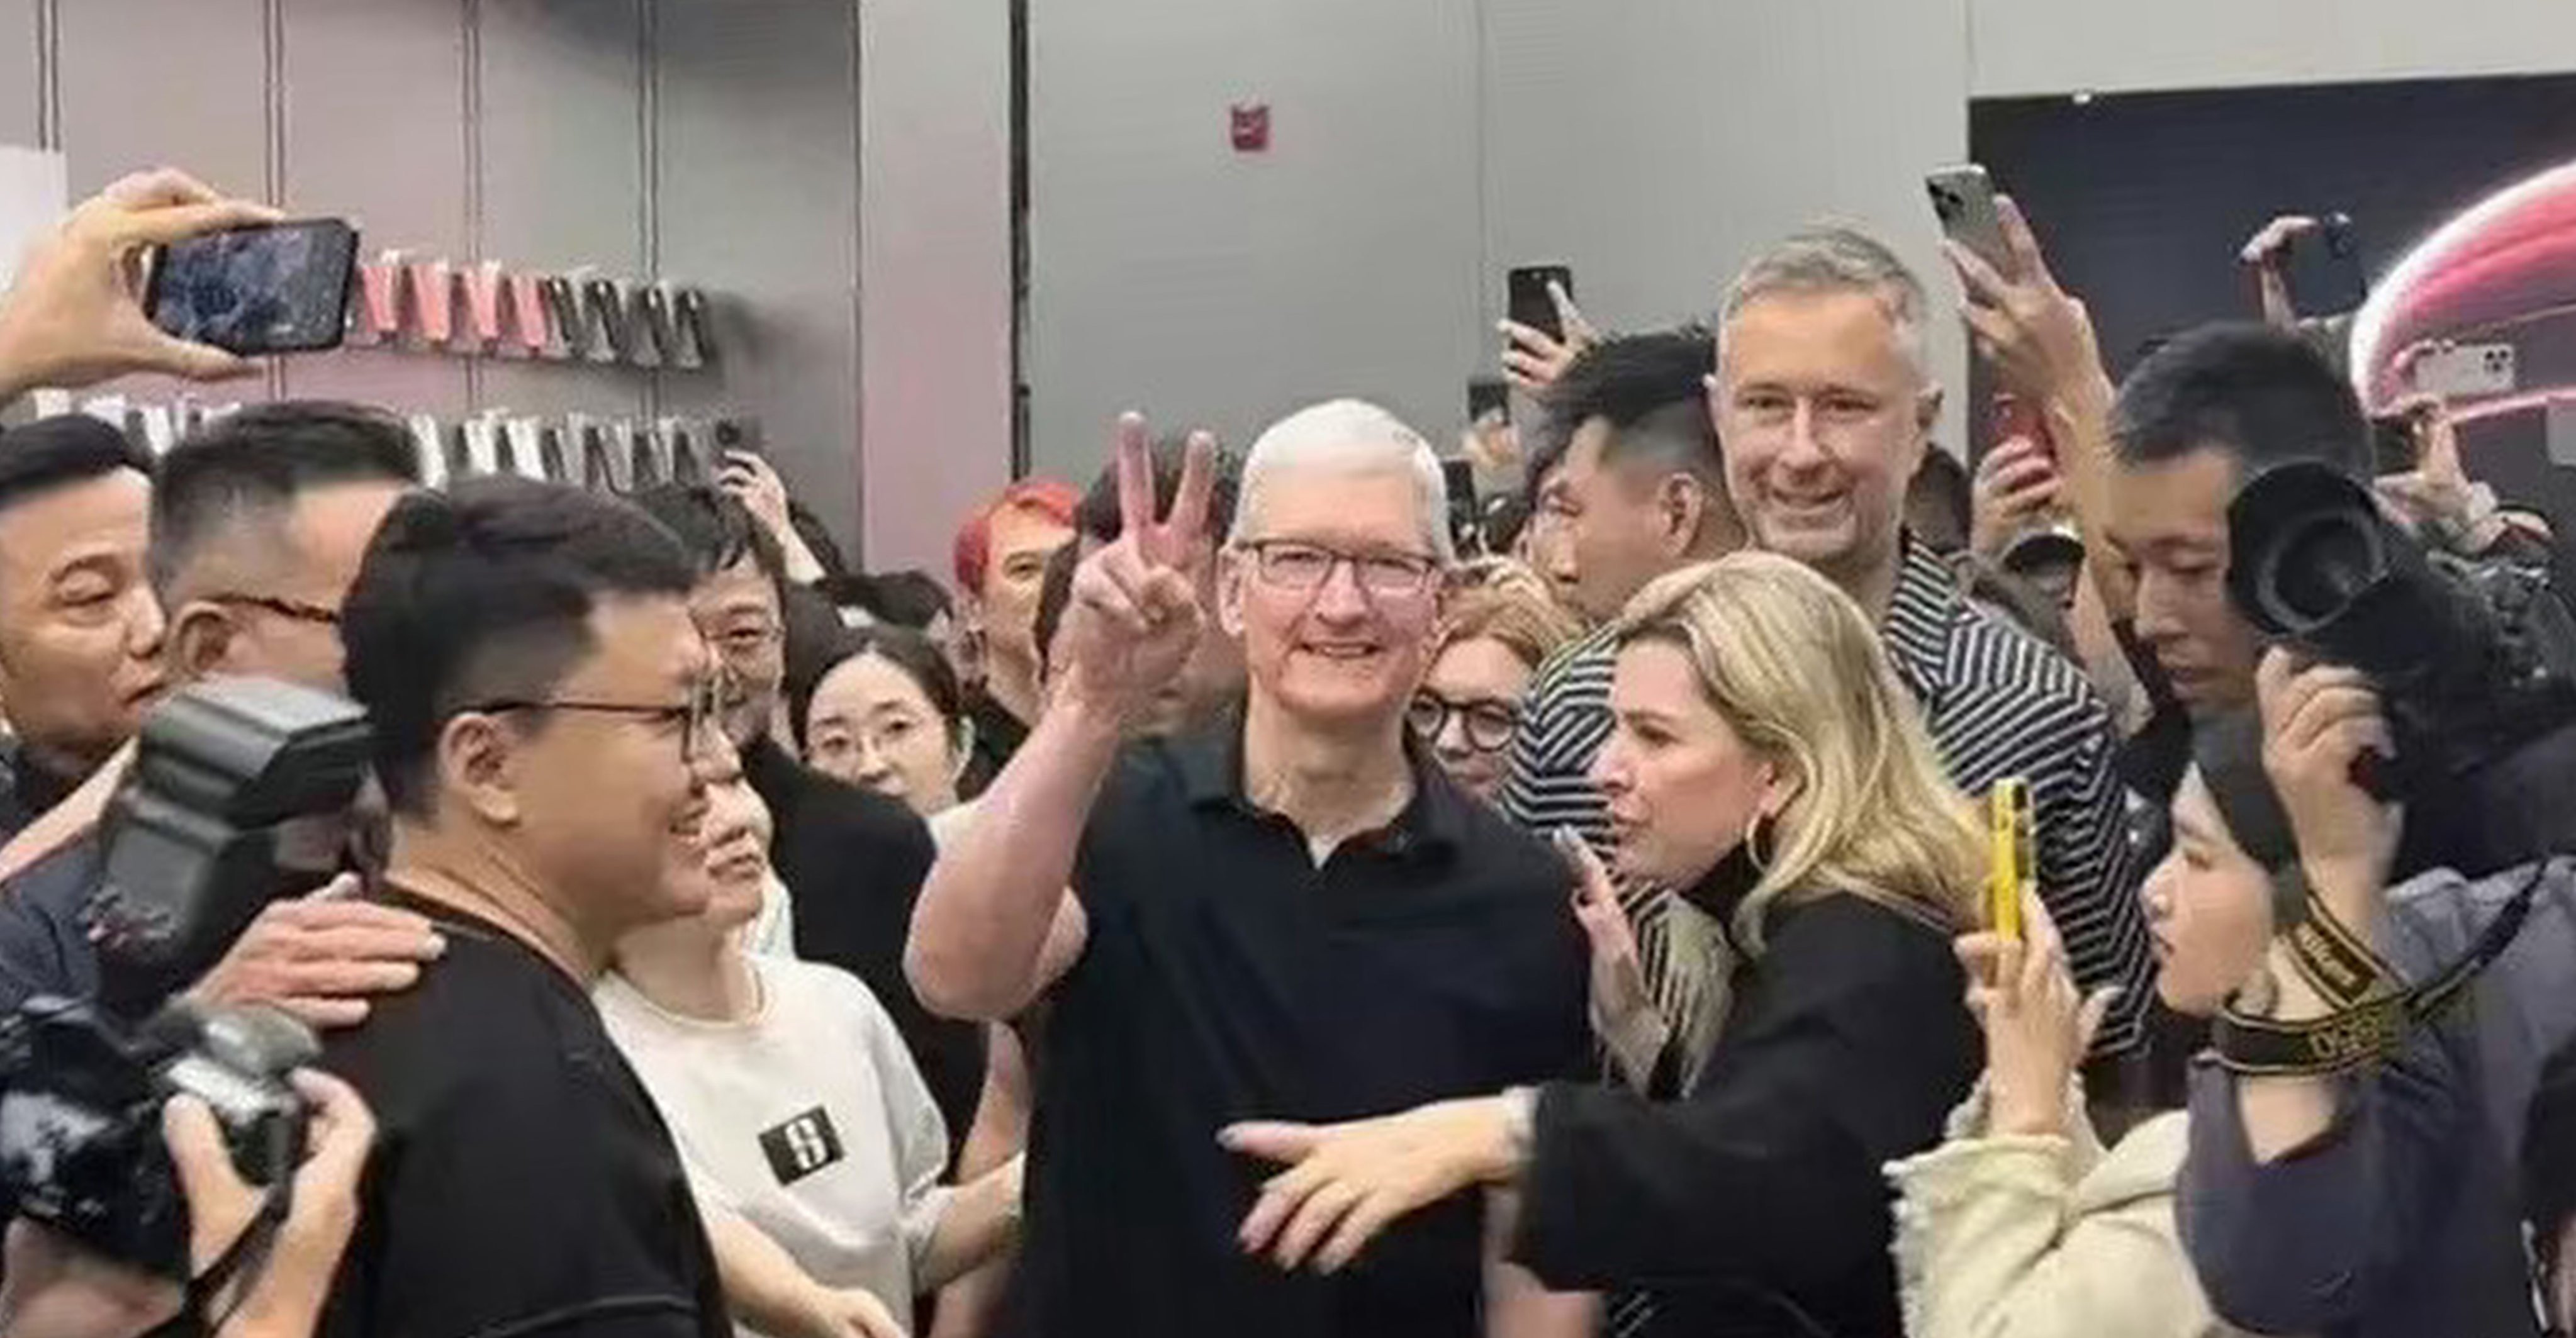 Apple chief executive Tim Cook flashes a peace sign, as he faced local media last week when he visited an Apple Store in Chengdu, capital of southwestern Sichuan province. Photo: Weibo 